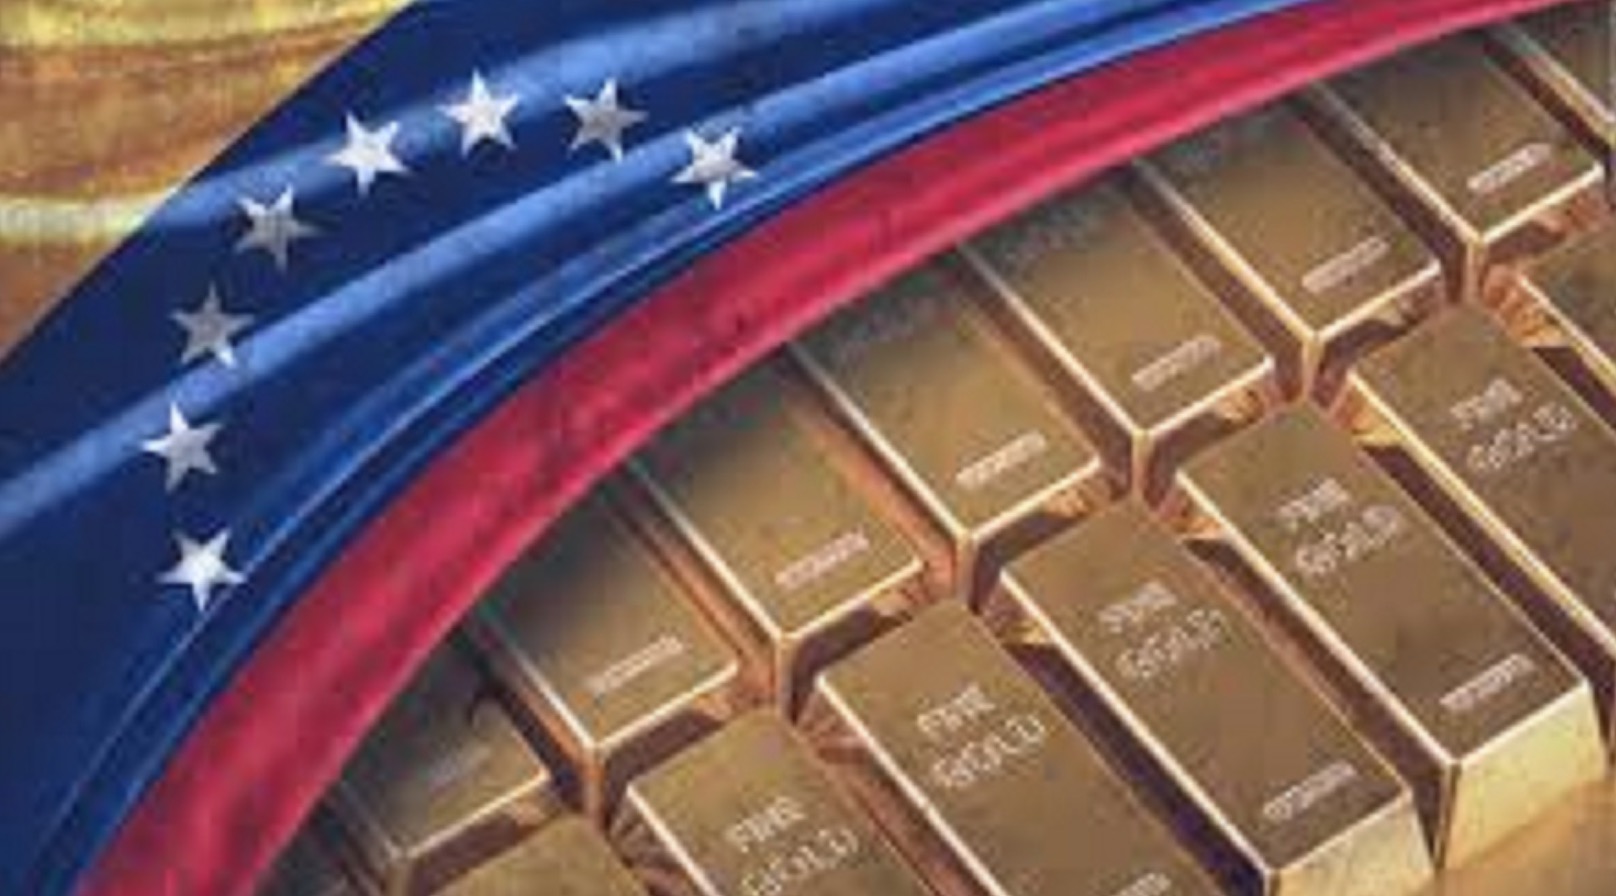 As COVID-19 Pushes Venezuela to the Brink, American Free Market Policies Must Help Pick Up the Pieces